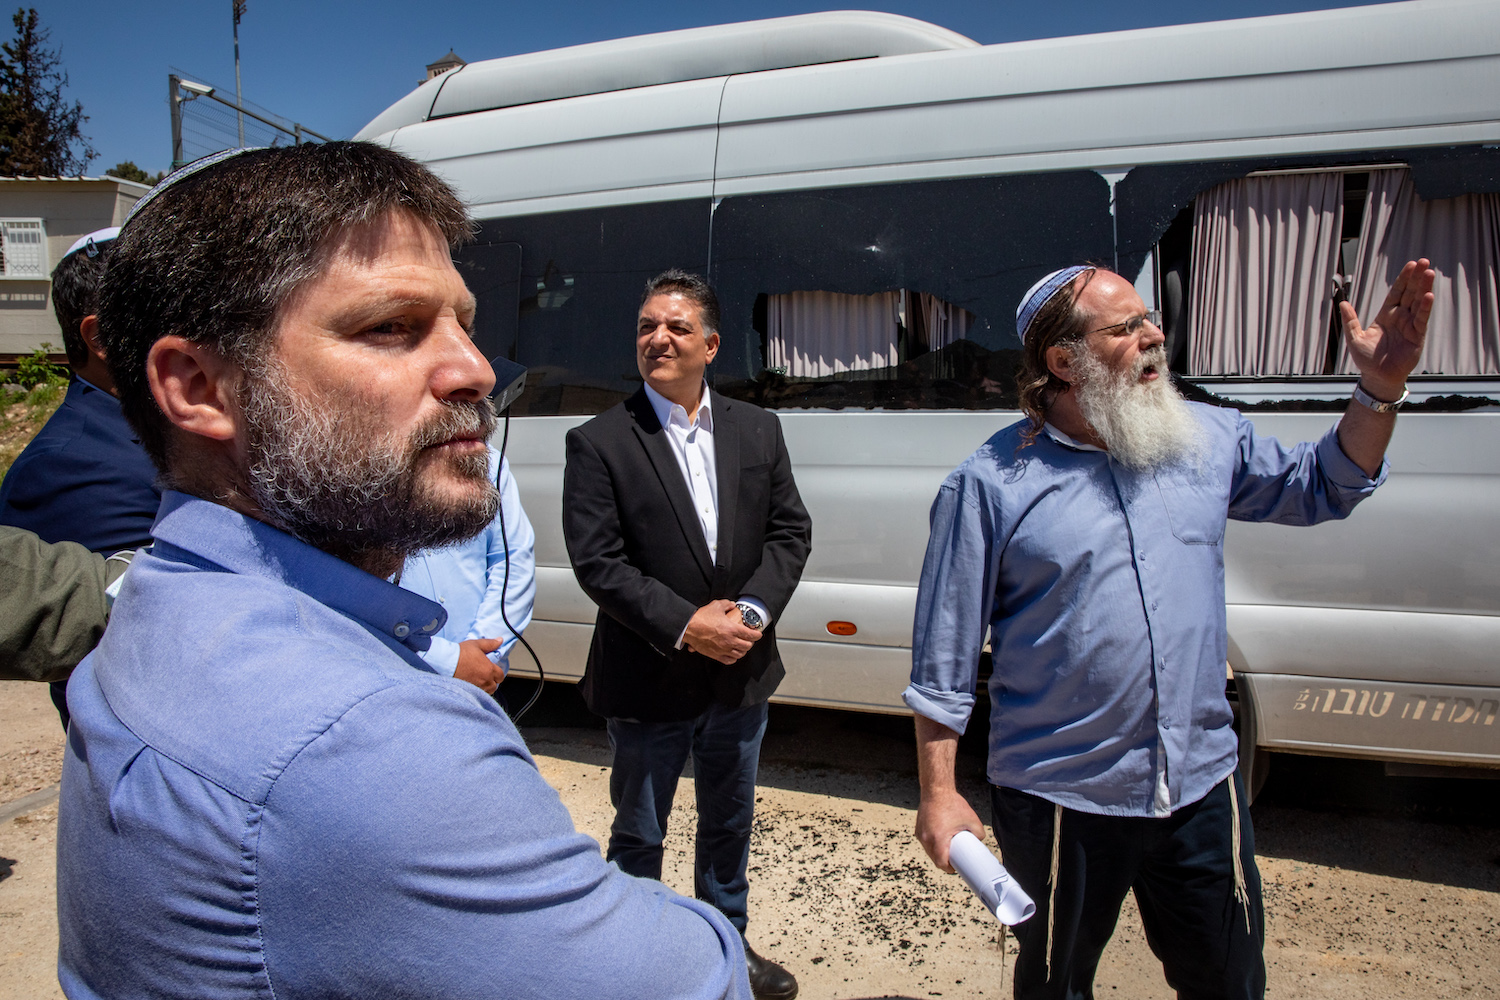 Bezalel Smotrich visits the Beit Orot Yeshiva at Mount of Olives in Jerusalem, after it was vandalized, April 26, 2021. (Olivier Fitoussi/Flash90)